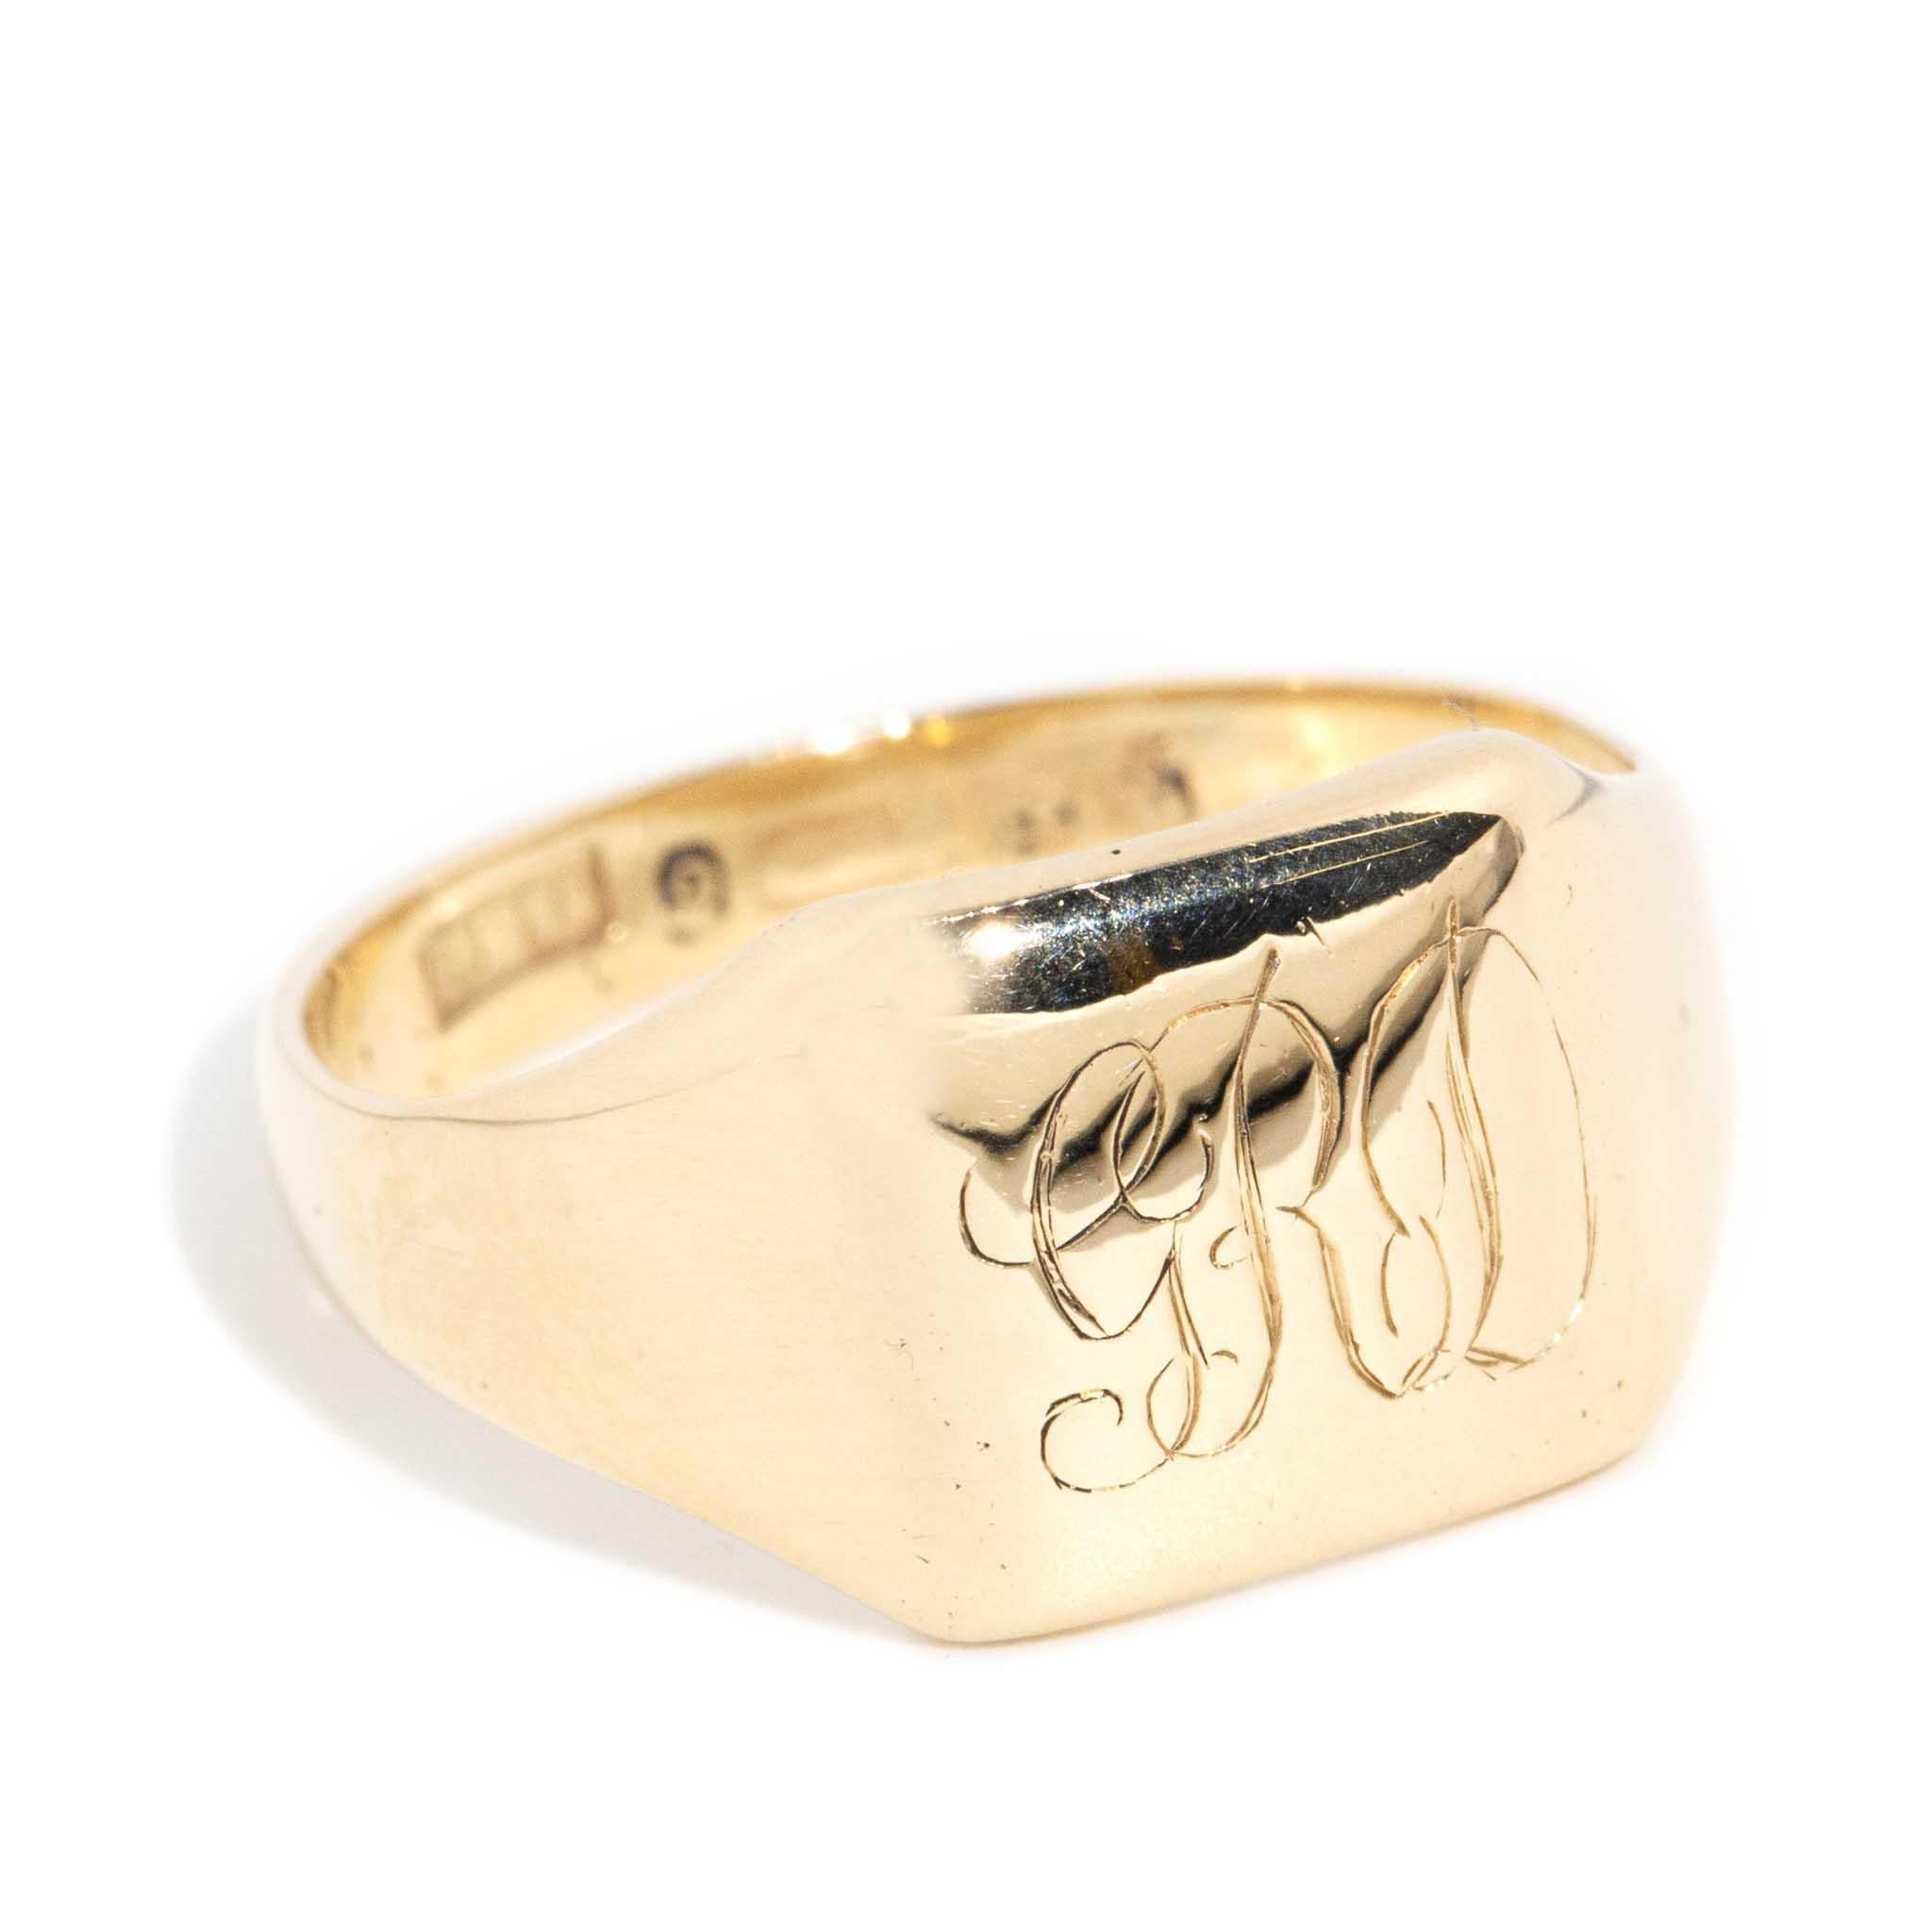 Vintage 1935 Hallmarked & Initialed Unisex Signet Ring 9 Carat Yellow Gold In Good Condition For Sale In Hamilton, AU